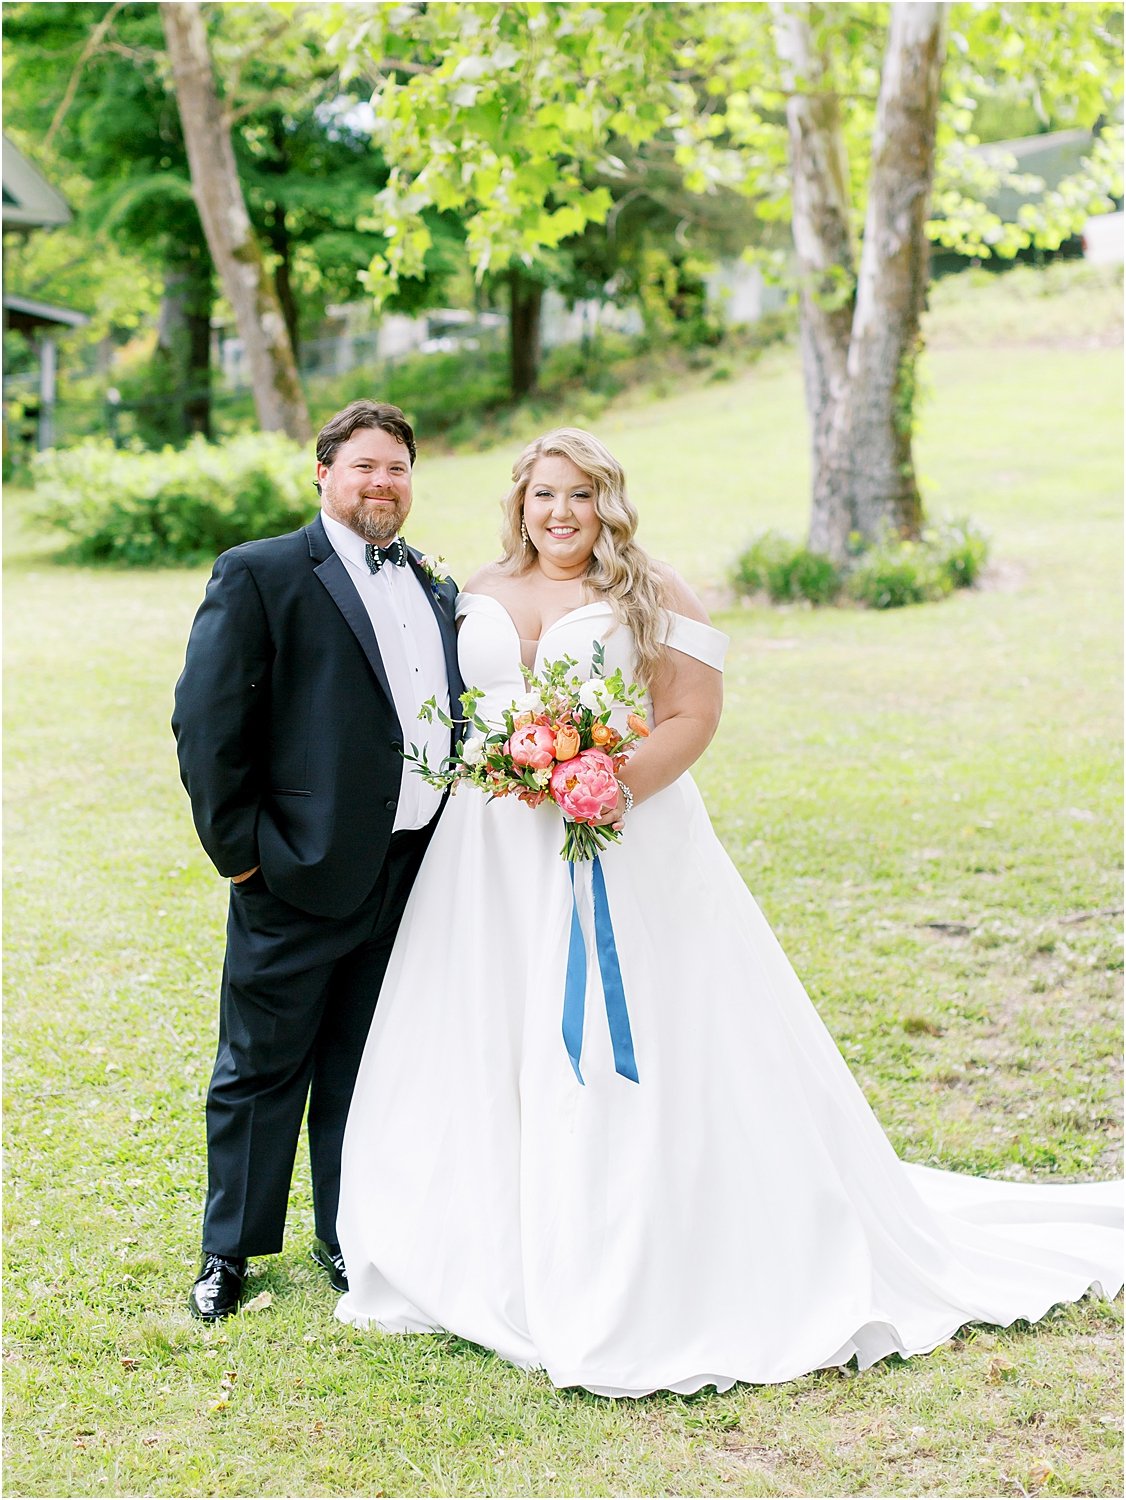 Summer pops of color Bride and Groom portraits